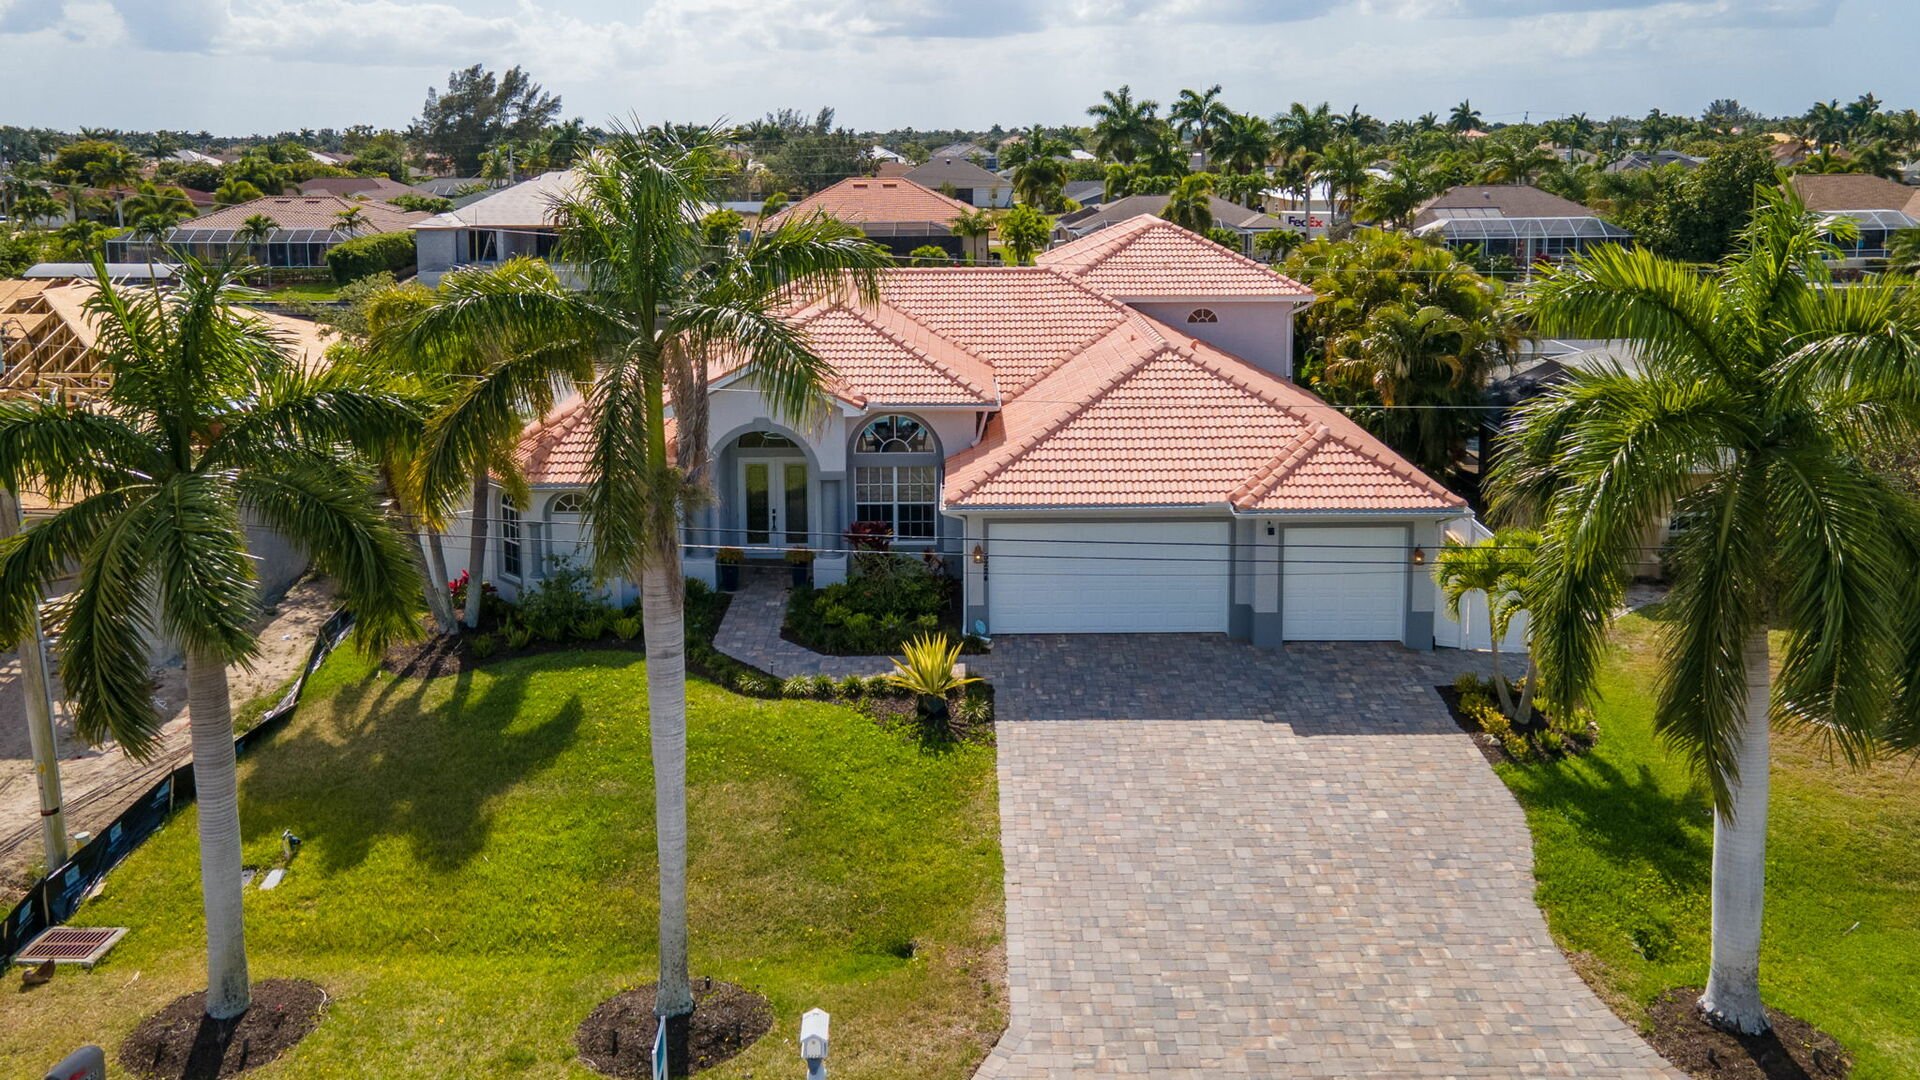 Cape Coral vacation rental with 5 bedrooms